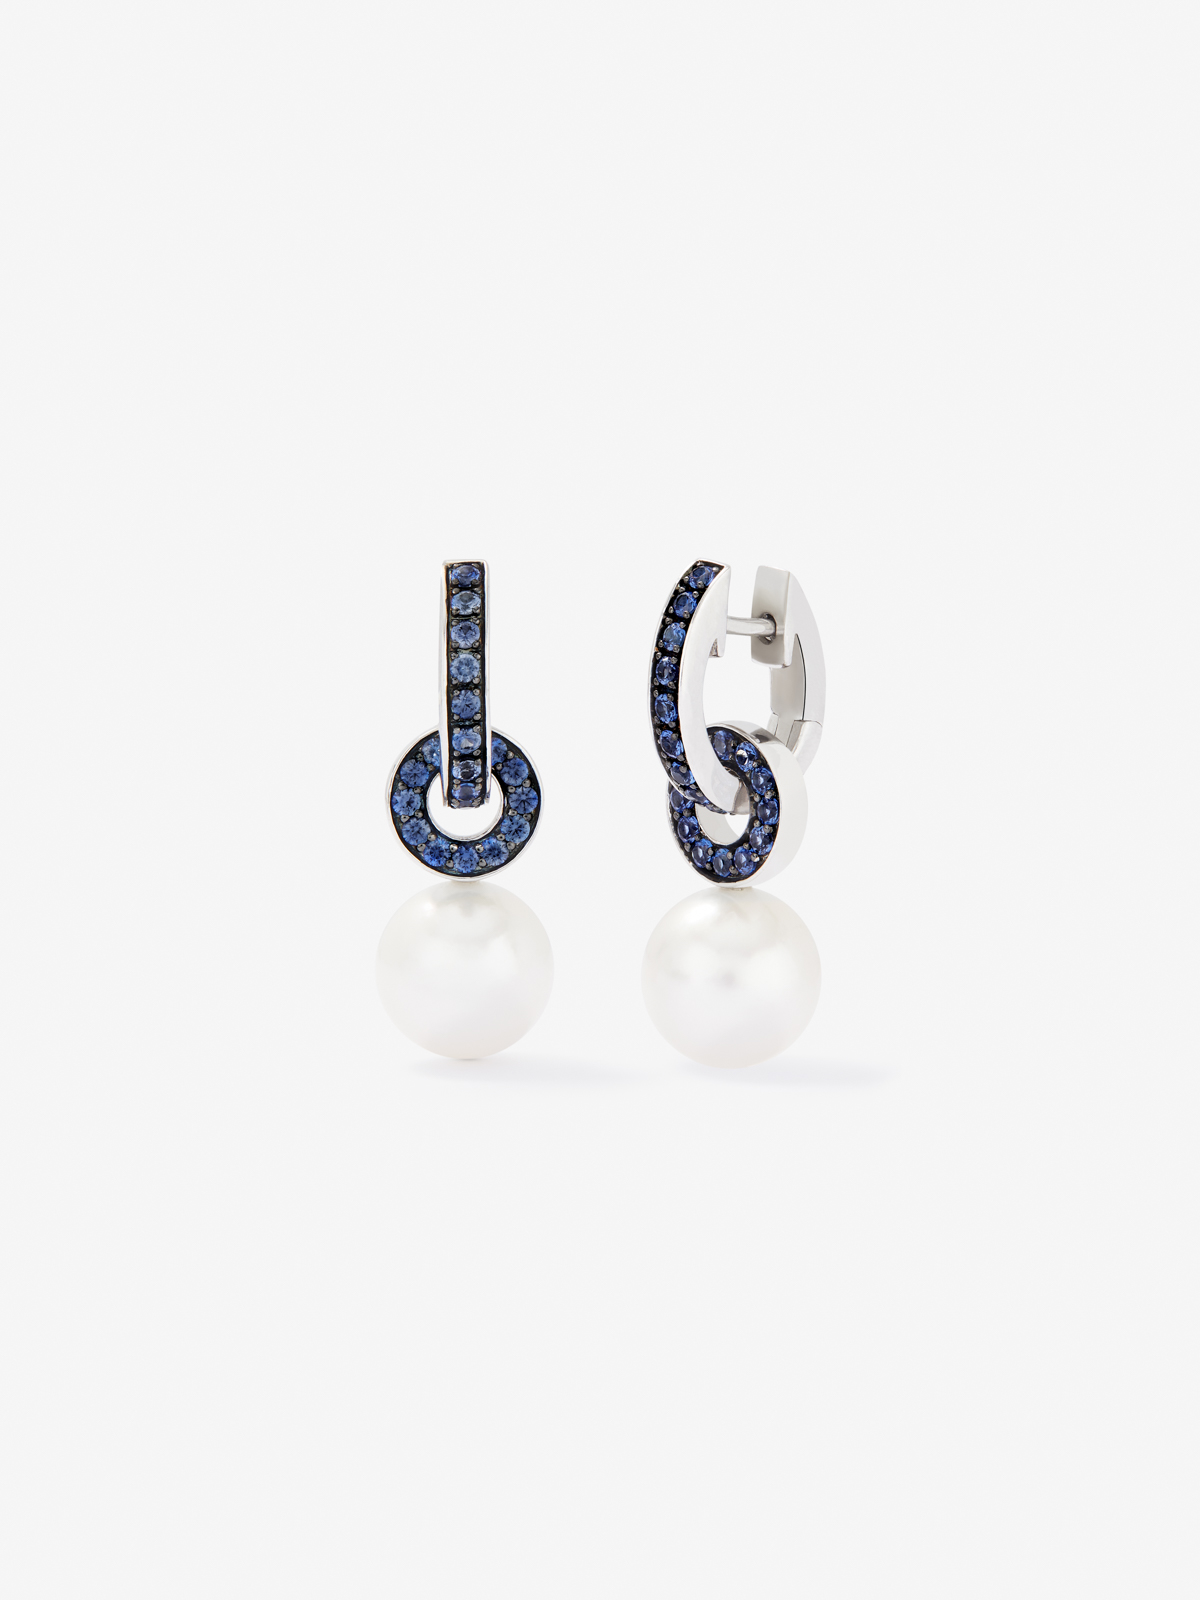 925 Silver double hoop earring combined with a 9mm Akoya pearl and sapphire.